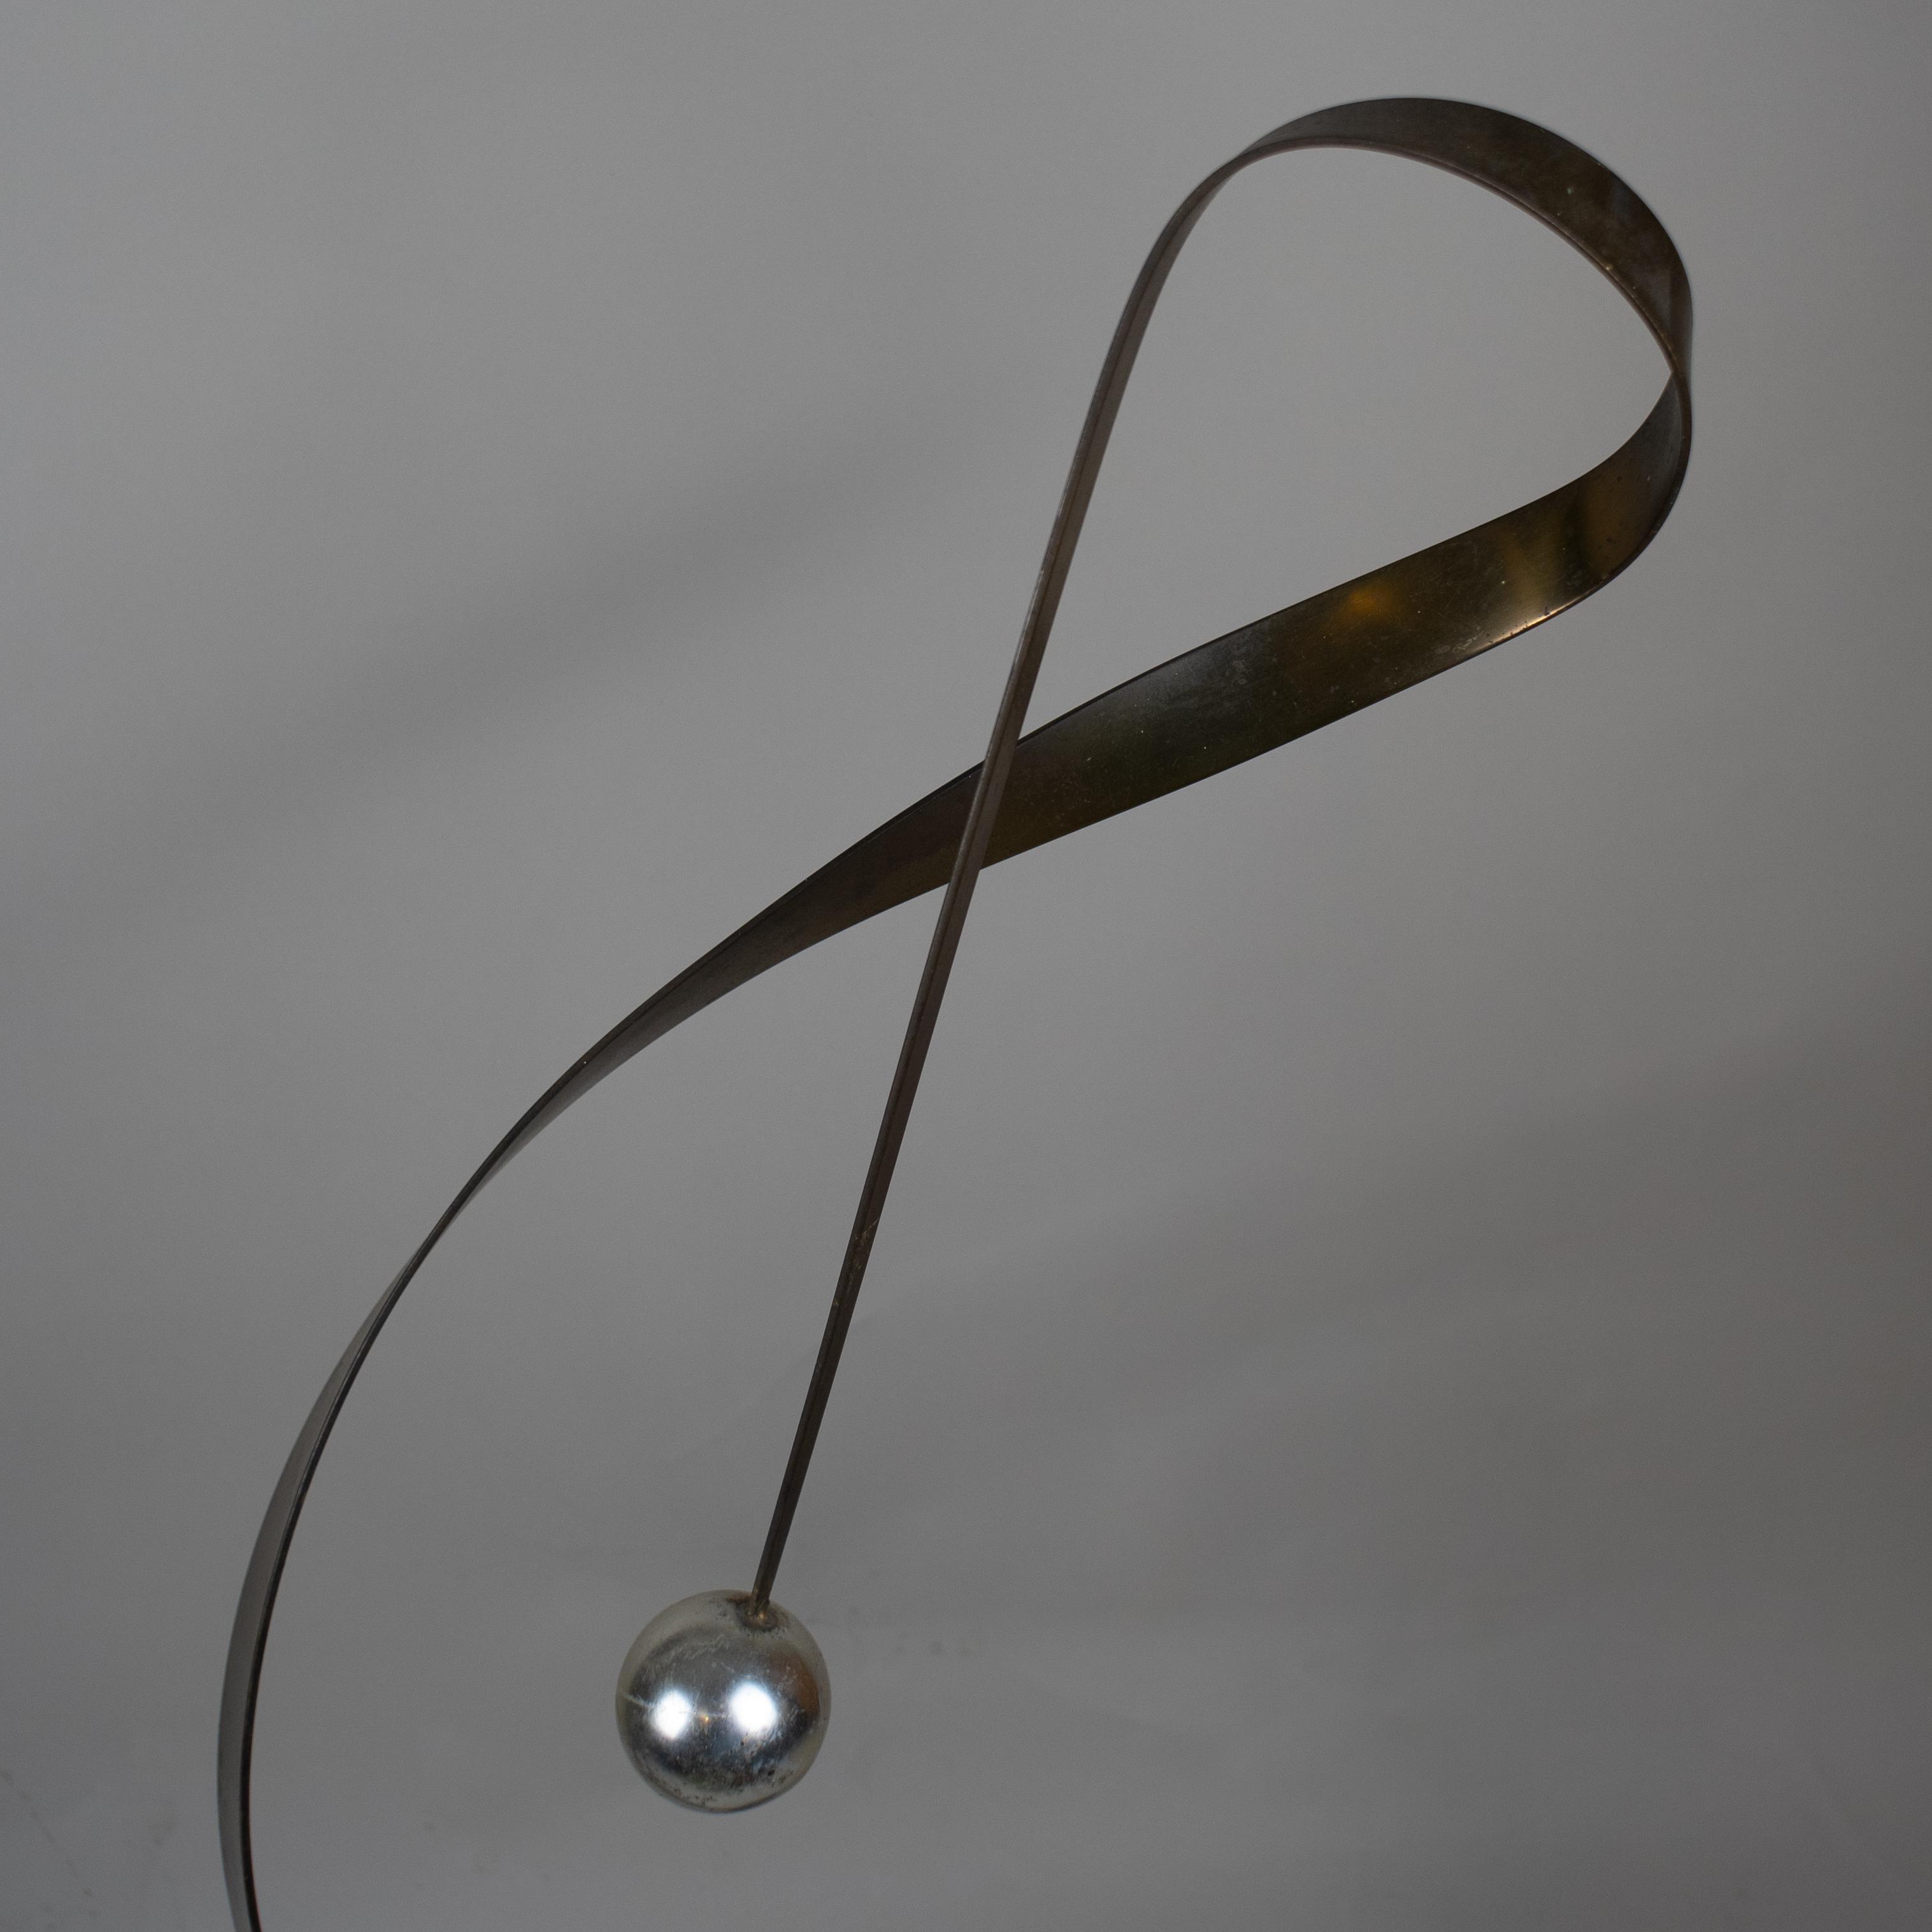 Curtis Jere Abstract Ribbon and Sphere Sculpture 2